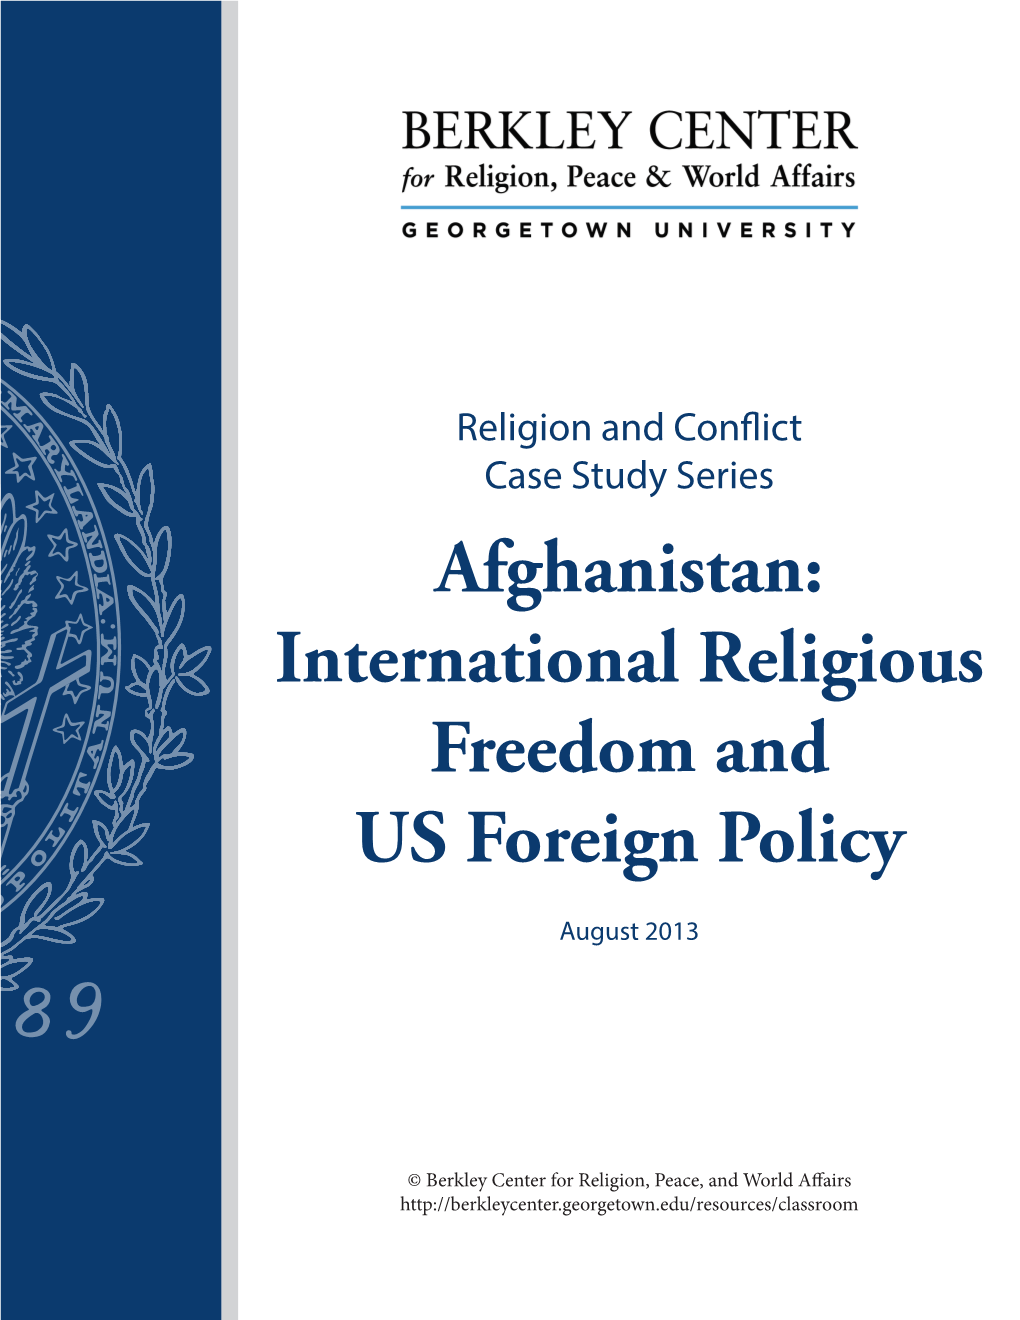 Afghanistan: International Religious Freedom and US Foreign Policy